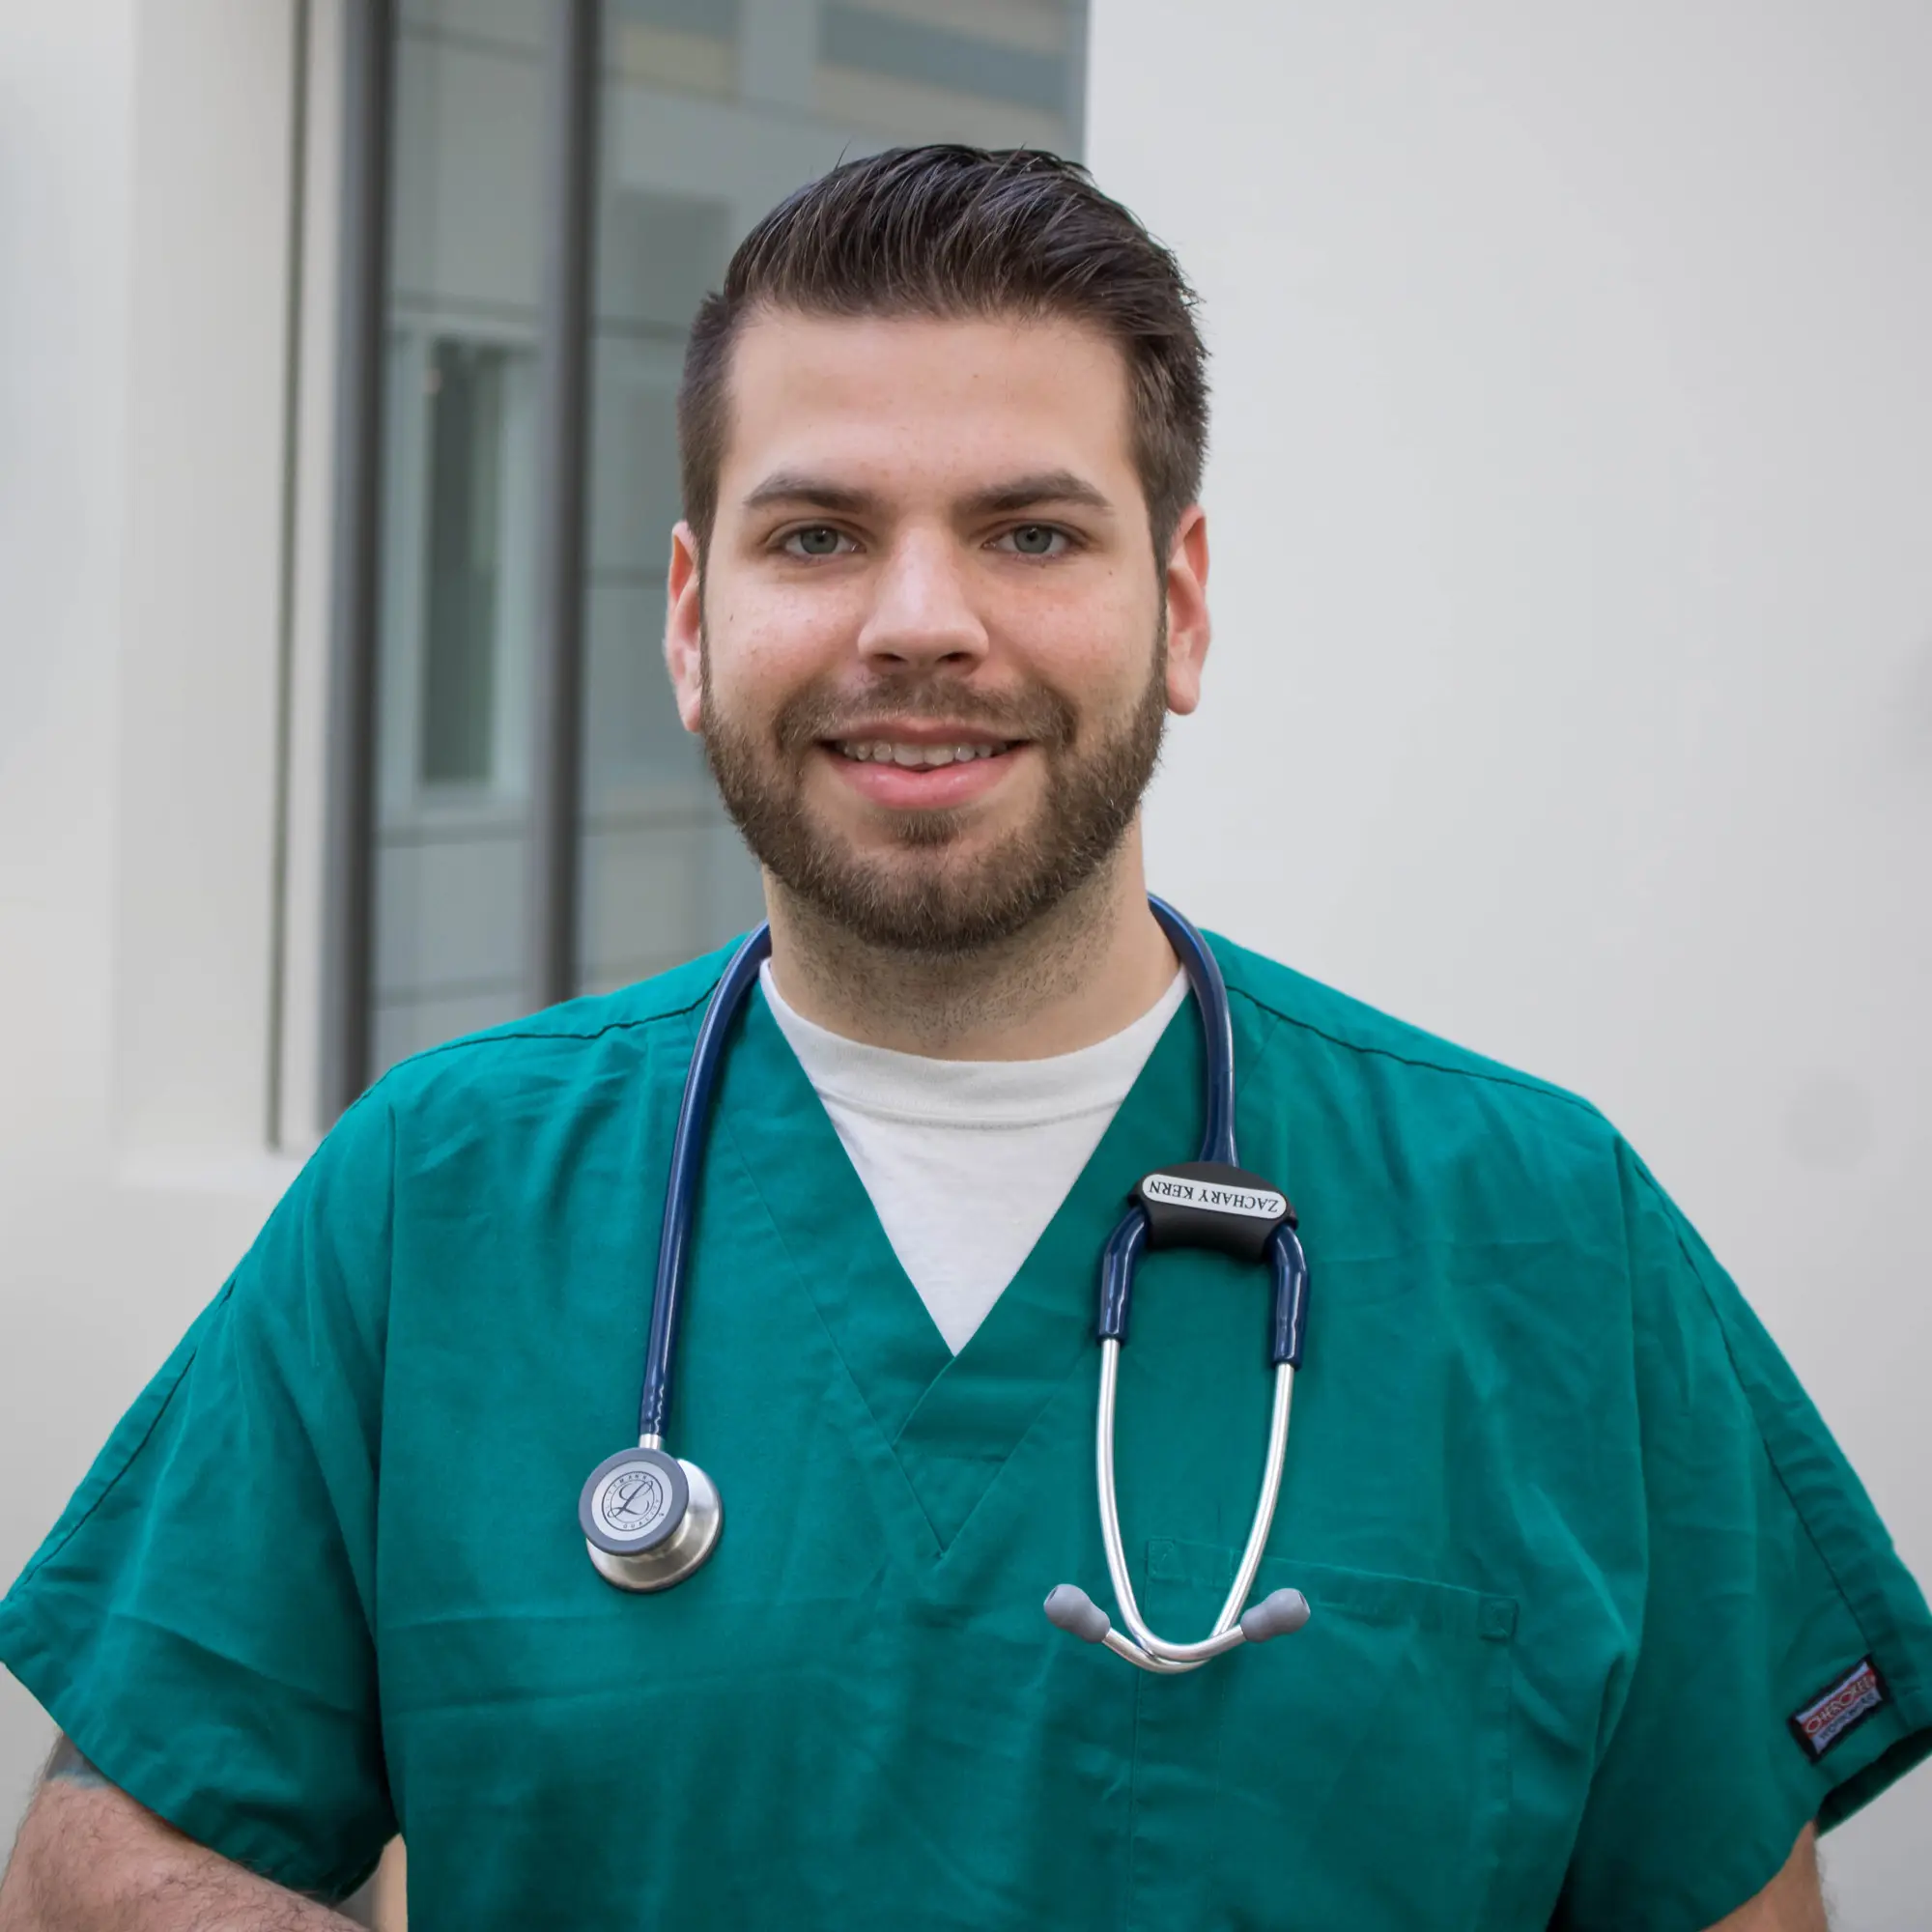 A man with short hair and a beard wearing scrubs and a stethoscope smiles at the camera.